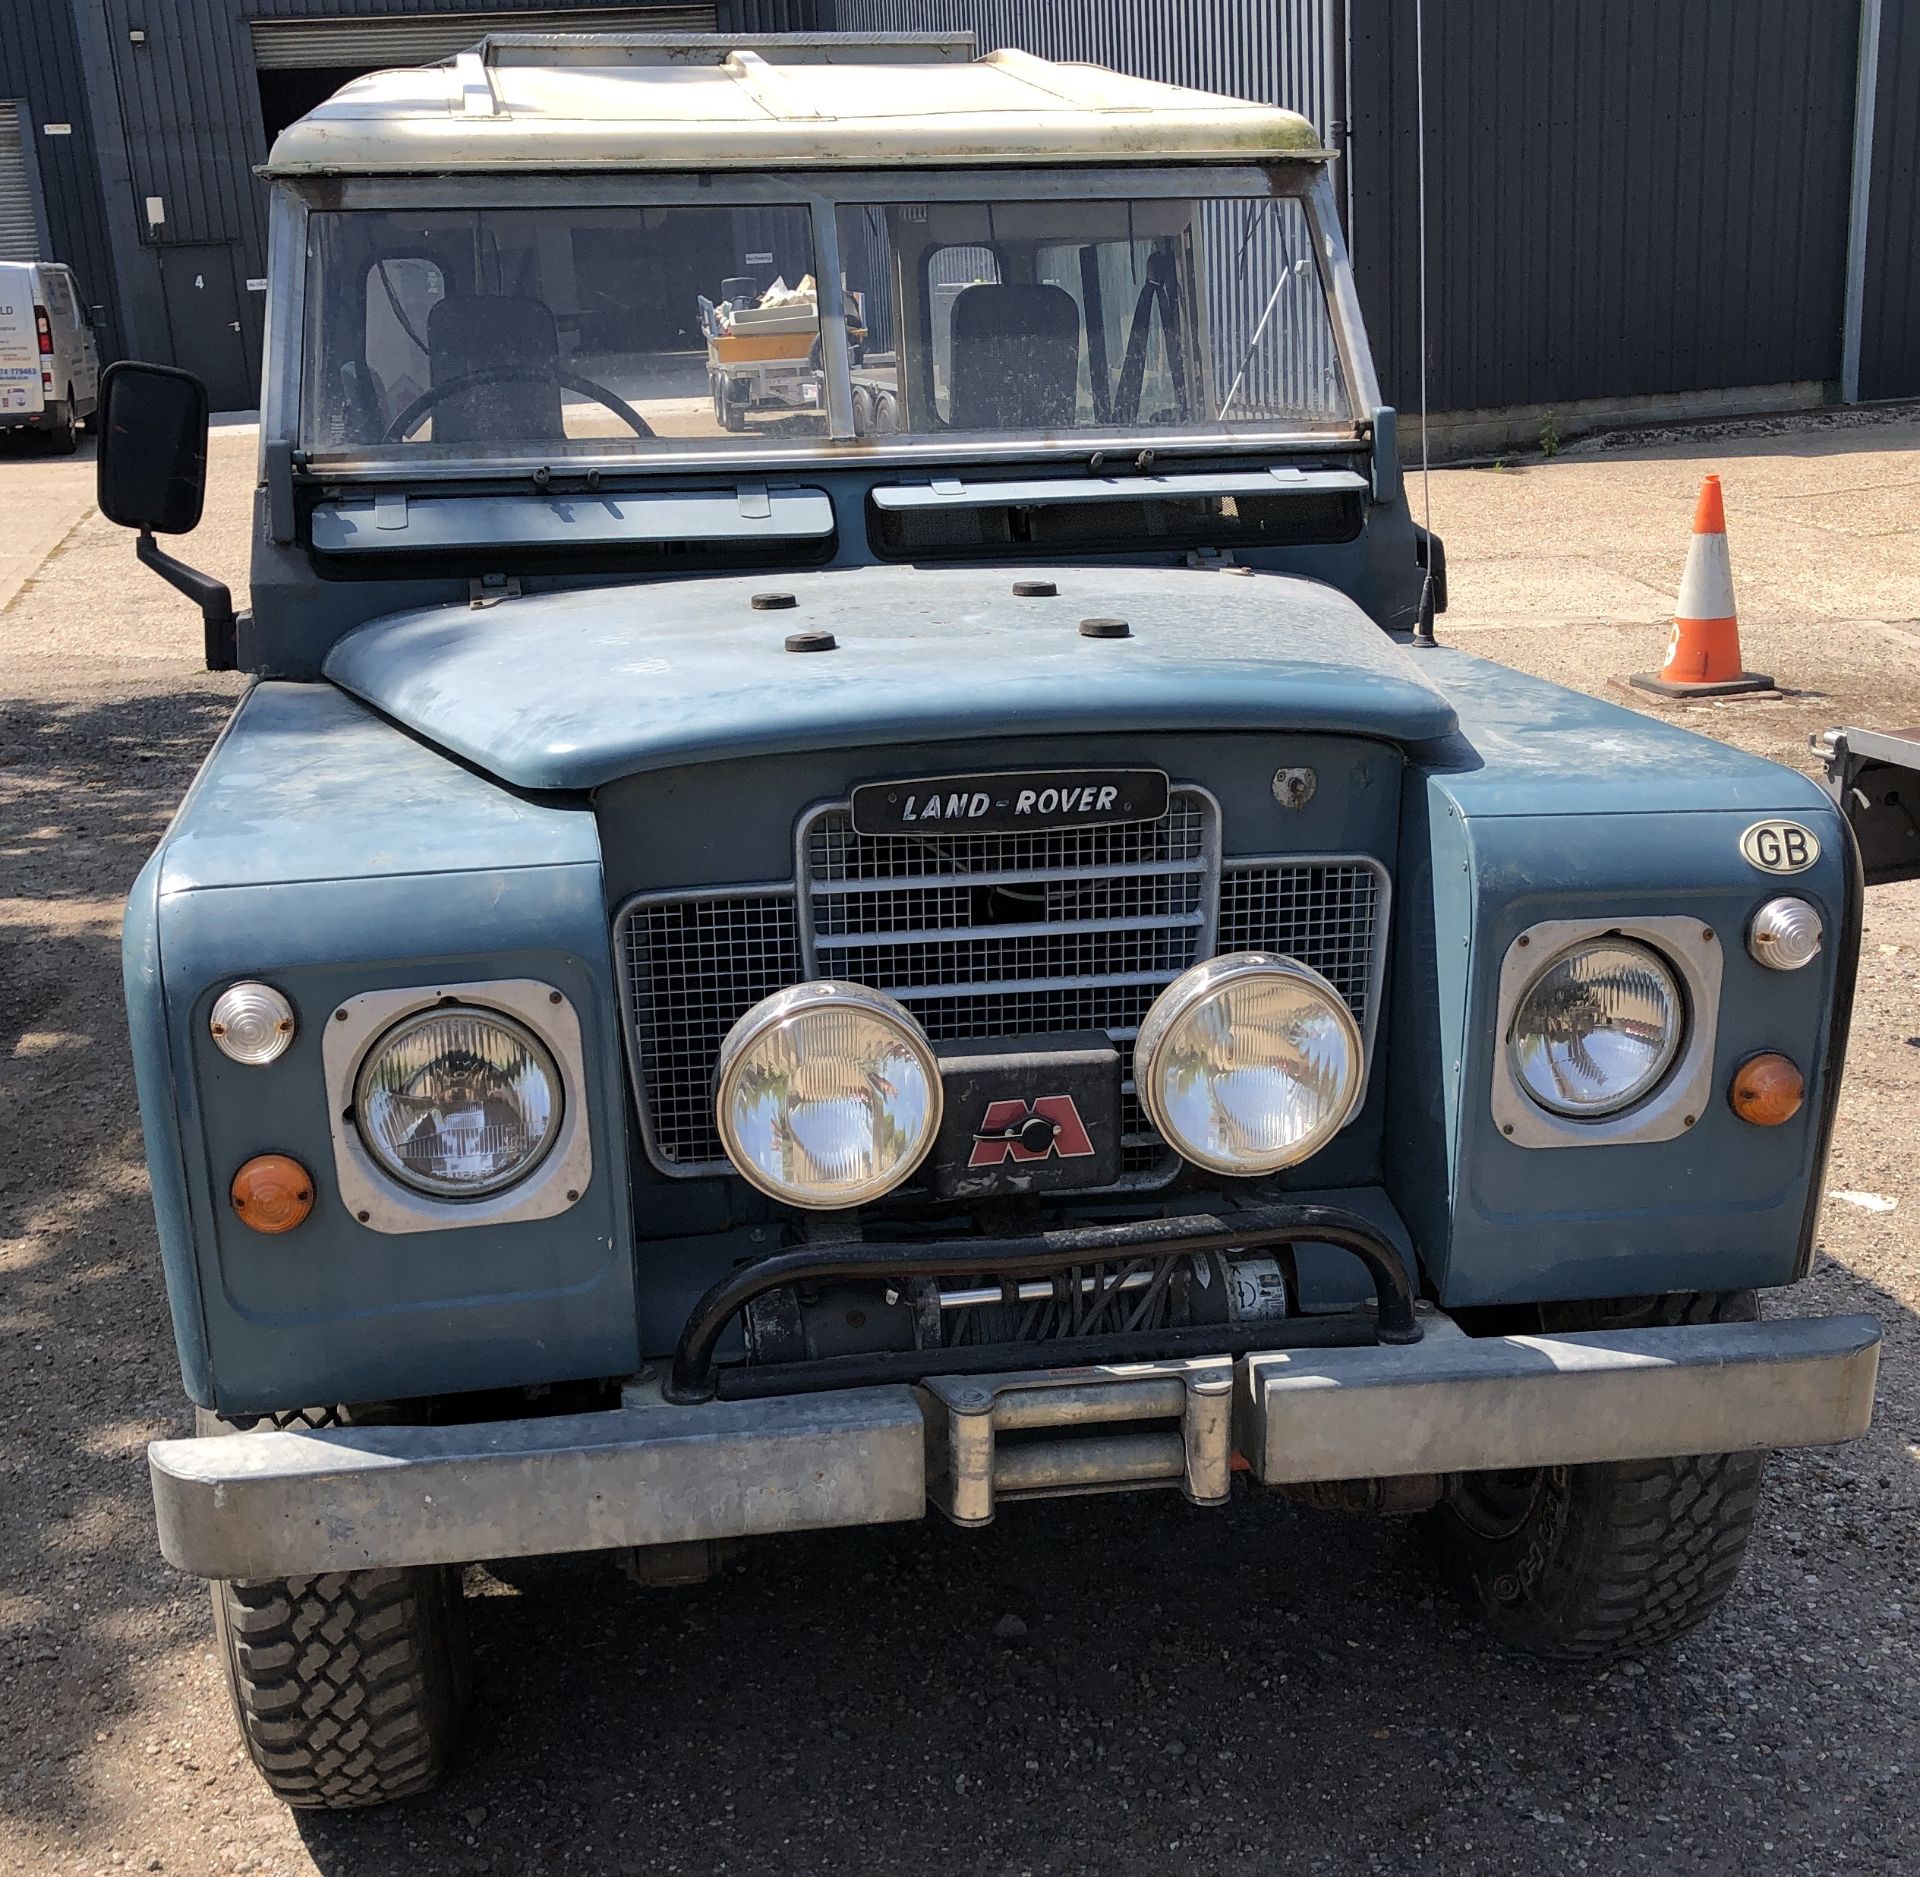 Land Rover 88, Series 3 - Registration YCW 737Y, First Registered 3rd March 1983; Removal Hard